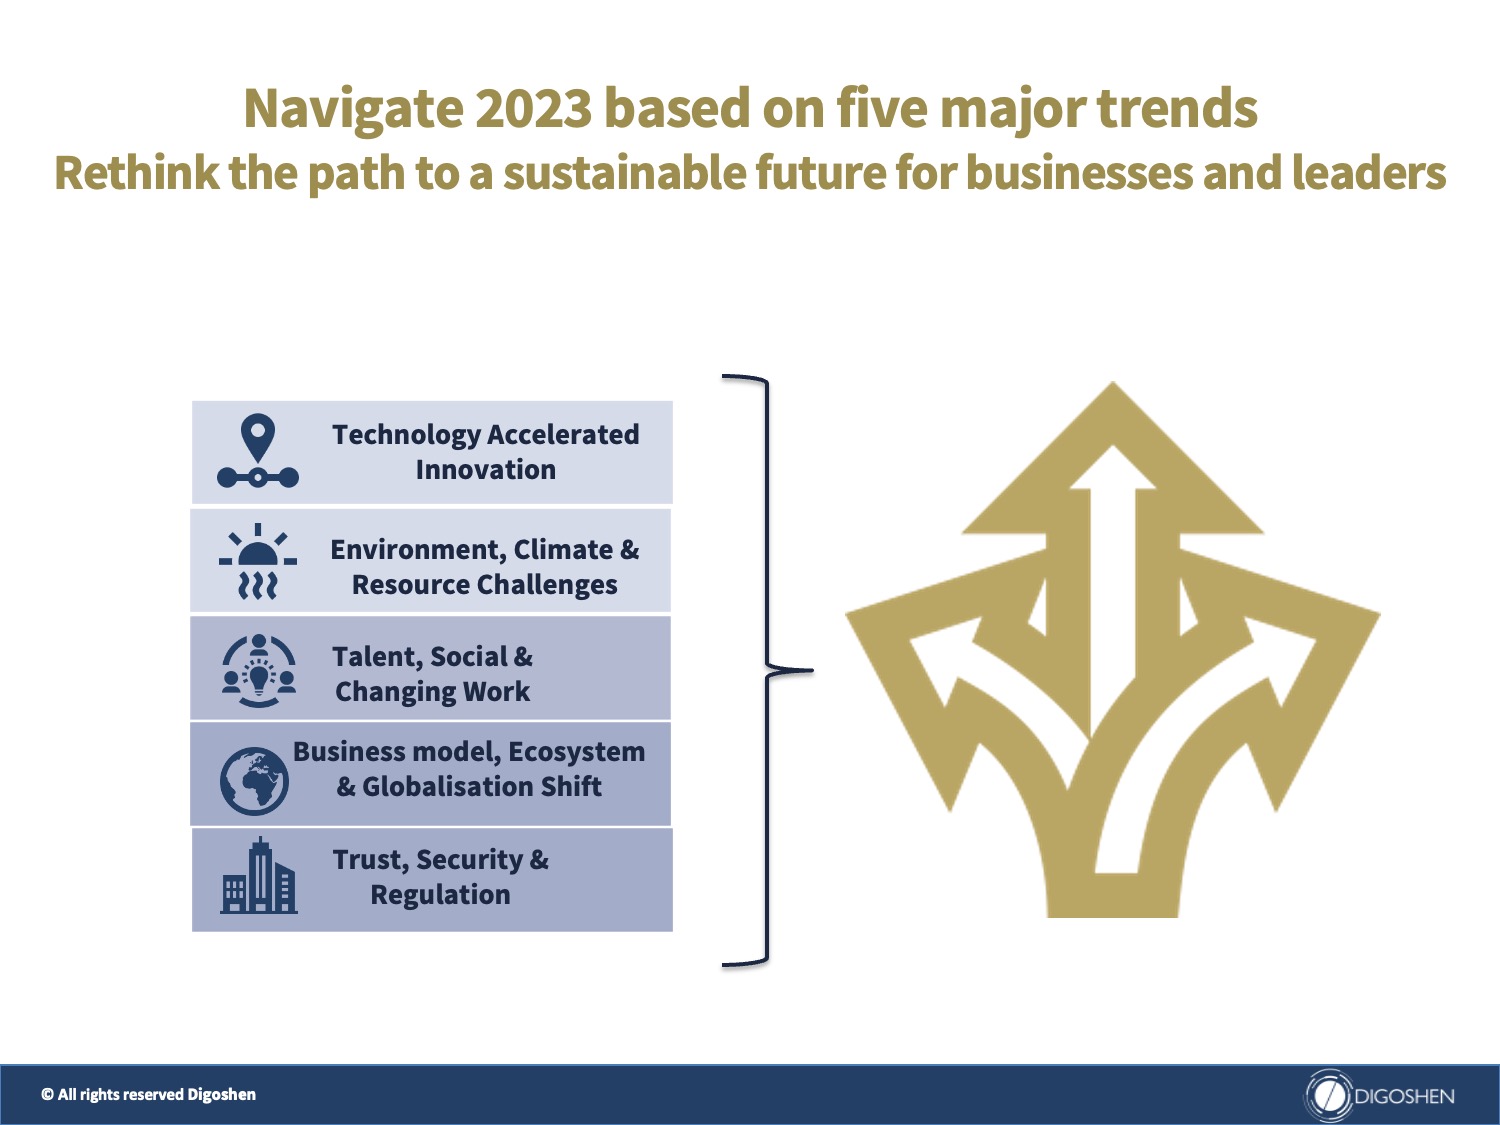 Rethink the path to a sustainable future for businesses and leaders